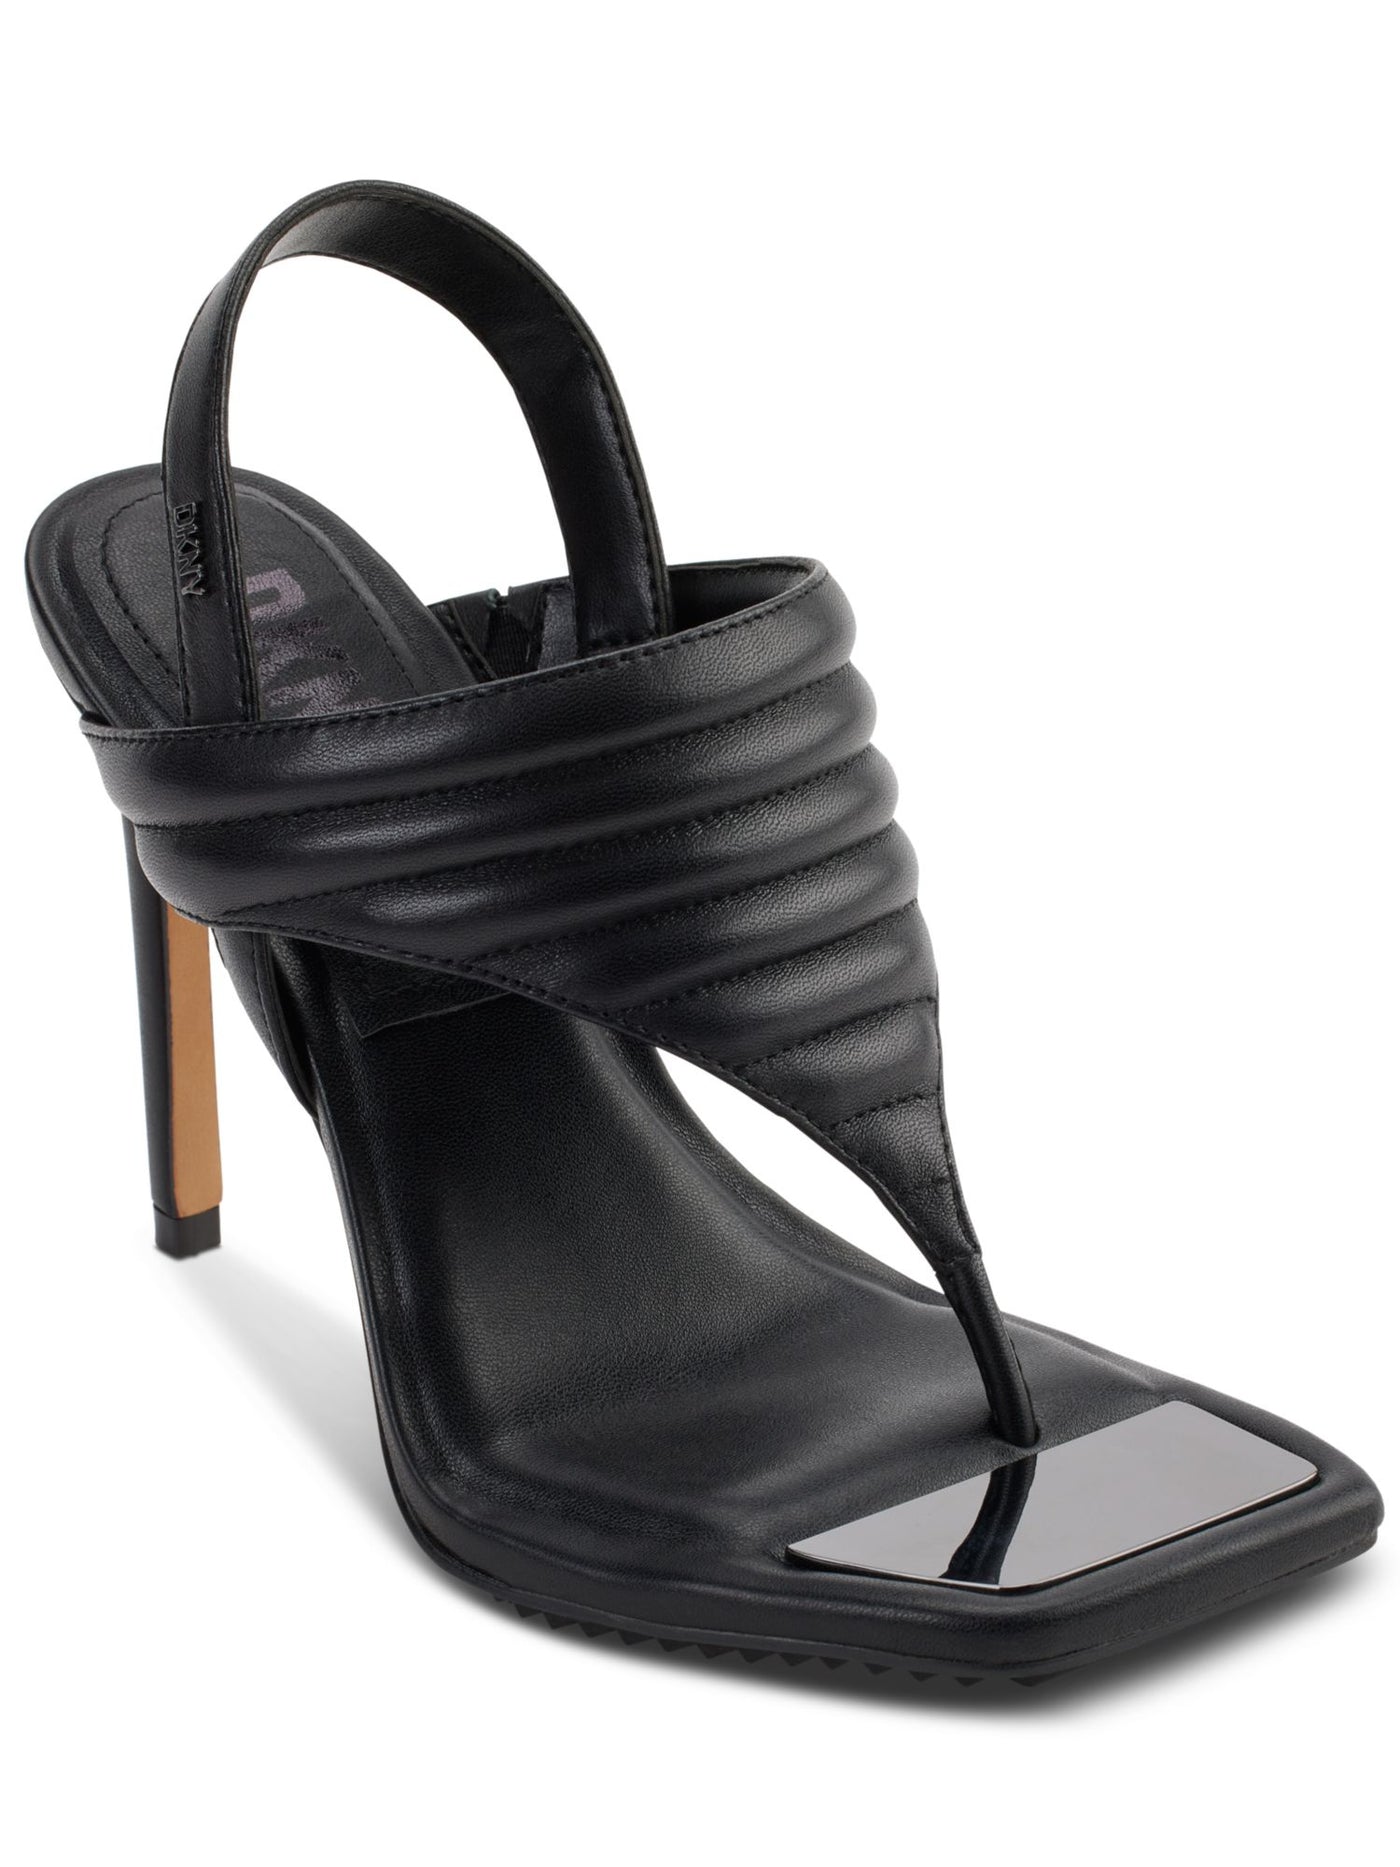 DKNY Womens Black Quilted Cushioned Ranae Square Toe Stiletto Slip On Leather Dress Slingback Sandal 6 M